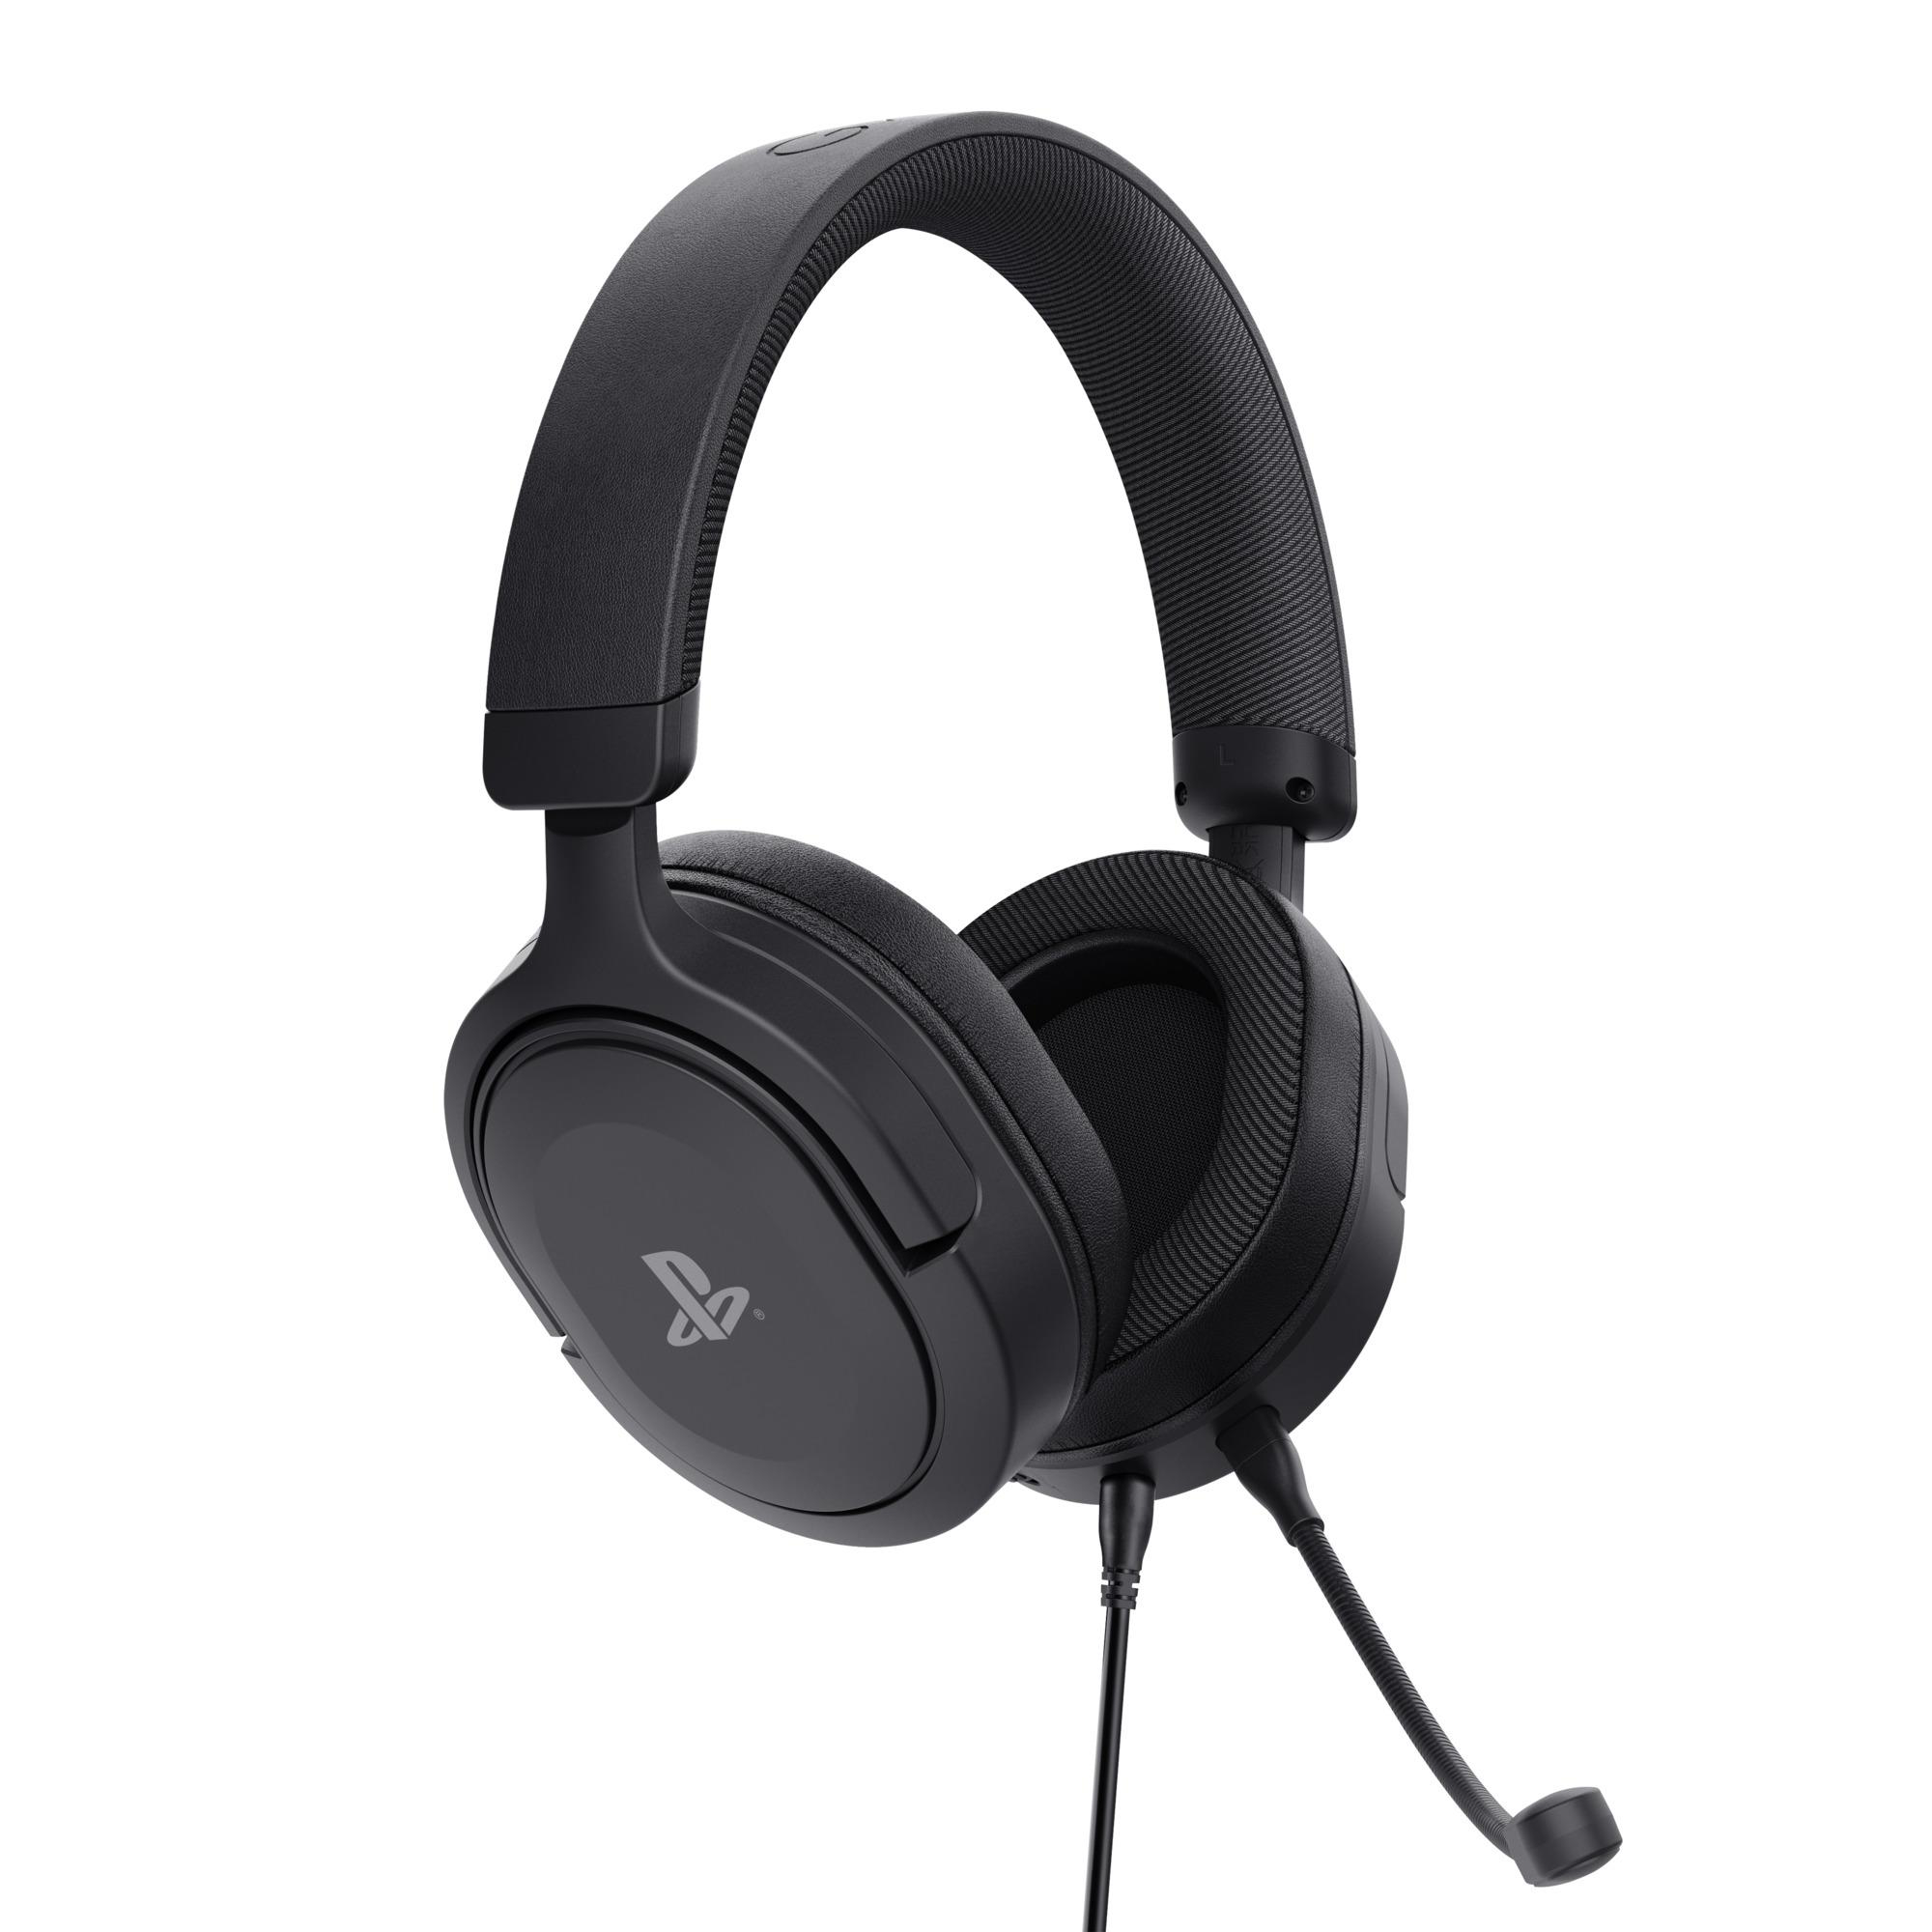 Over-ear GXT Headset Gaming TRUST für Schwarz 498 Gaming-Headset Forta PS5™,